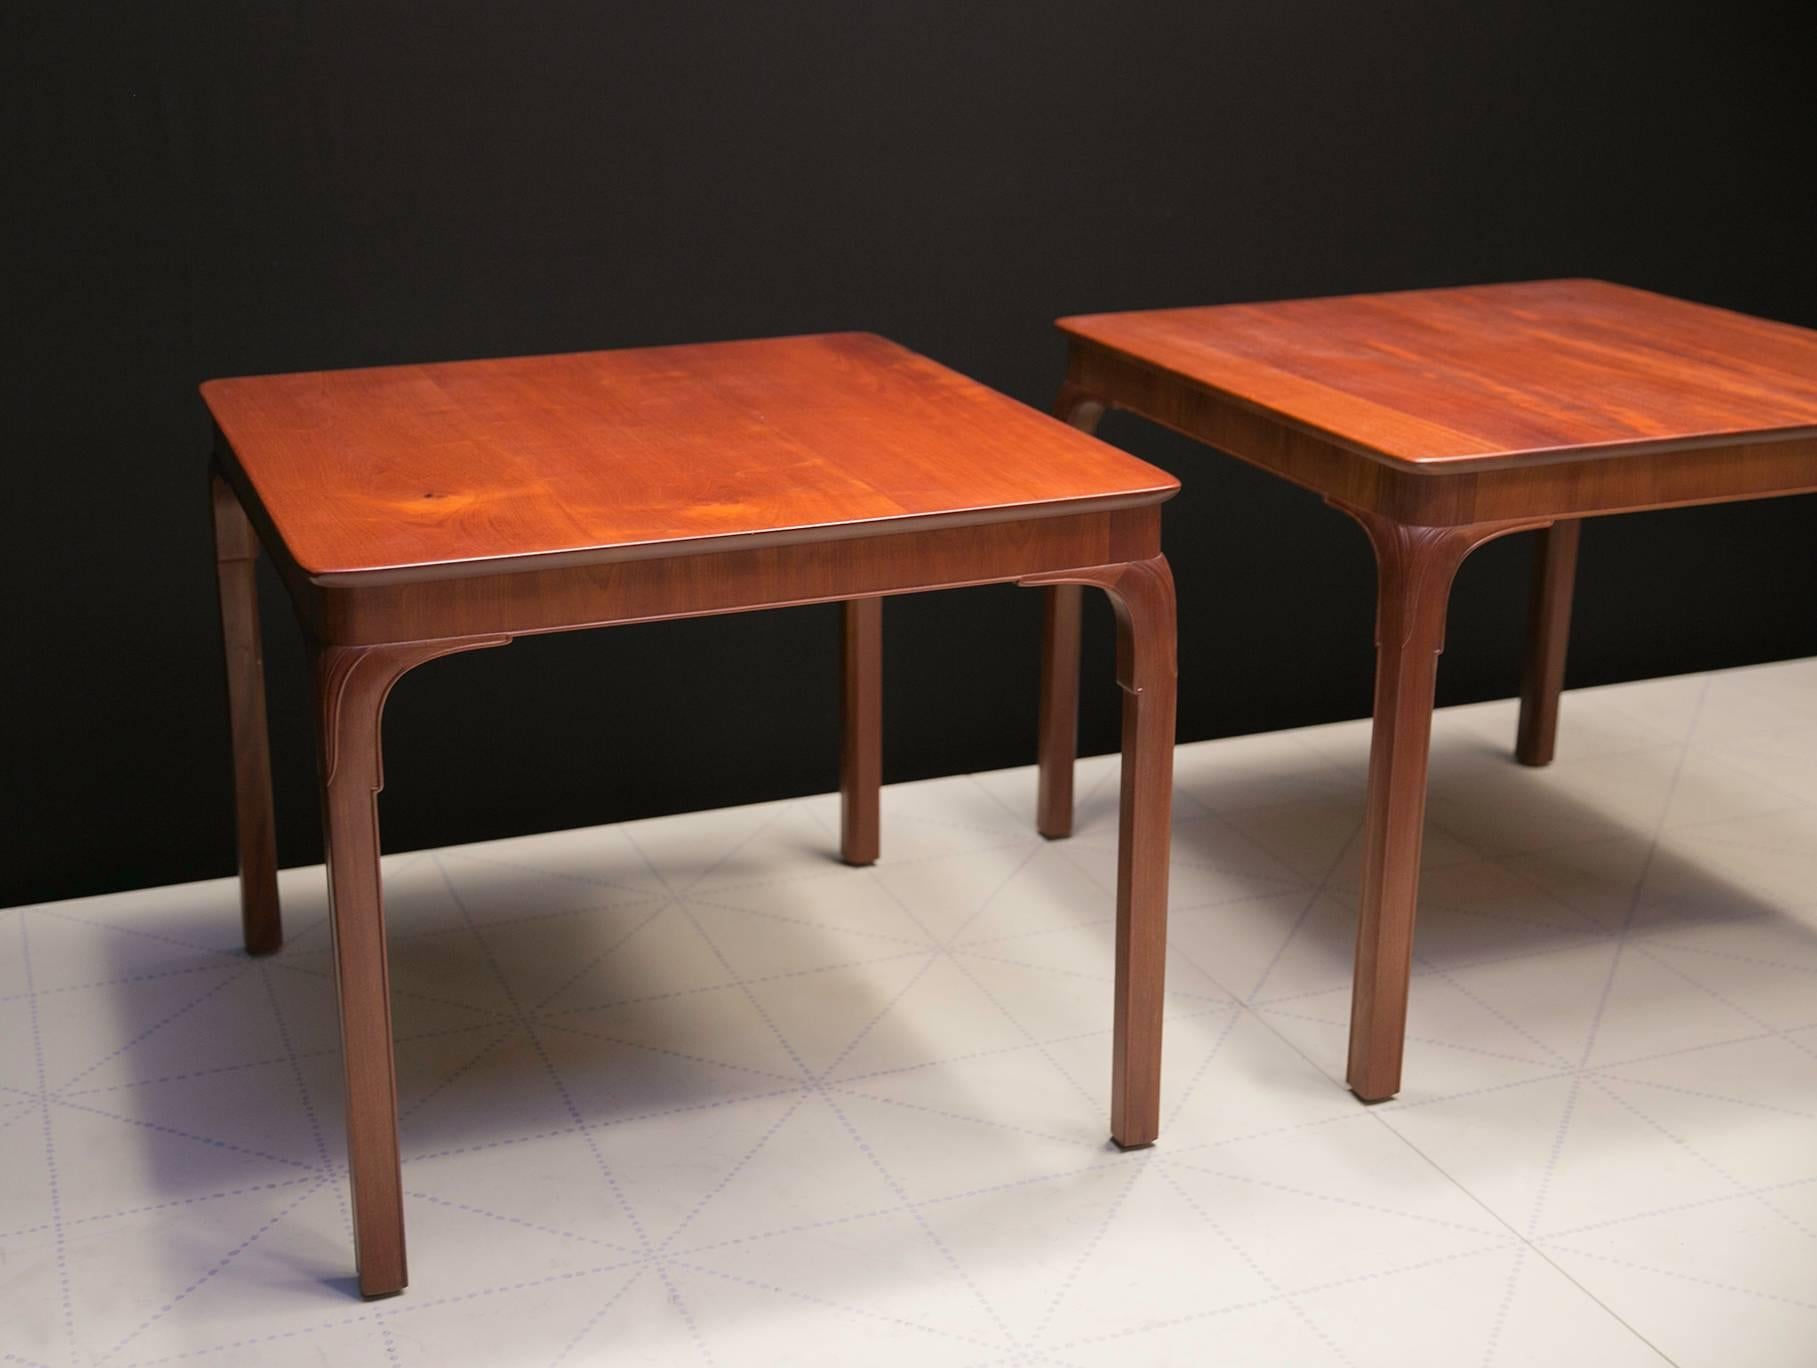 Scandinavian Modern Frits Henningsen's Monumental Side Tables, Solid Cuban Mahogany and Carved Legs For Sale